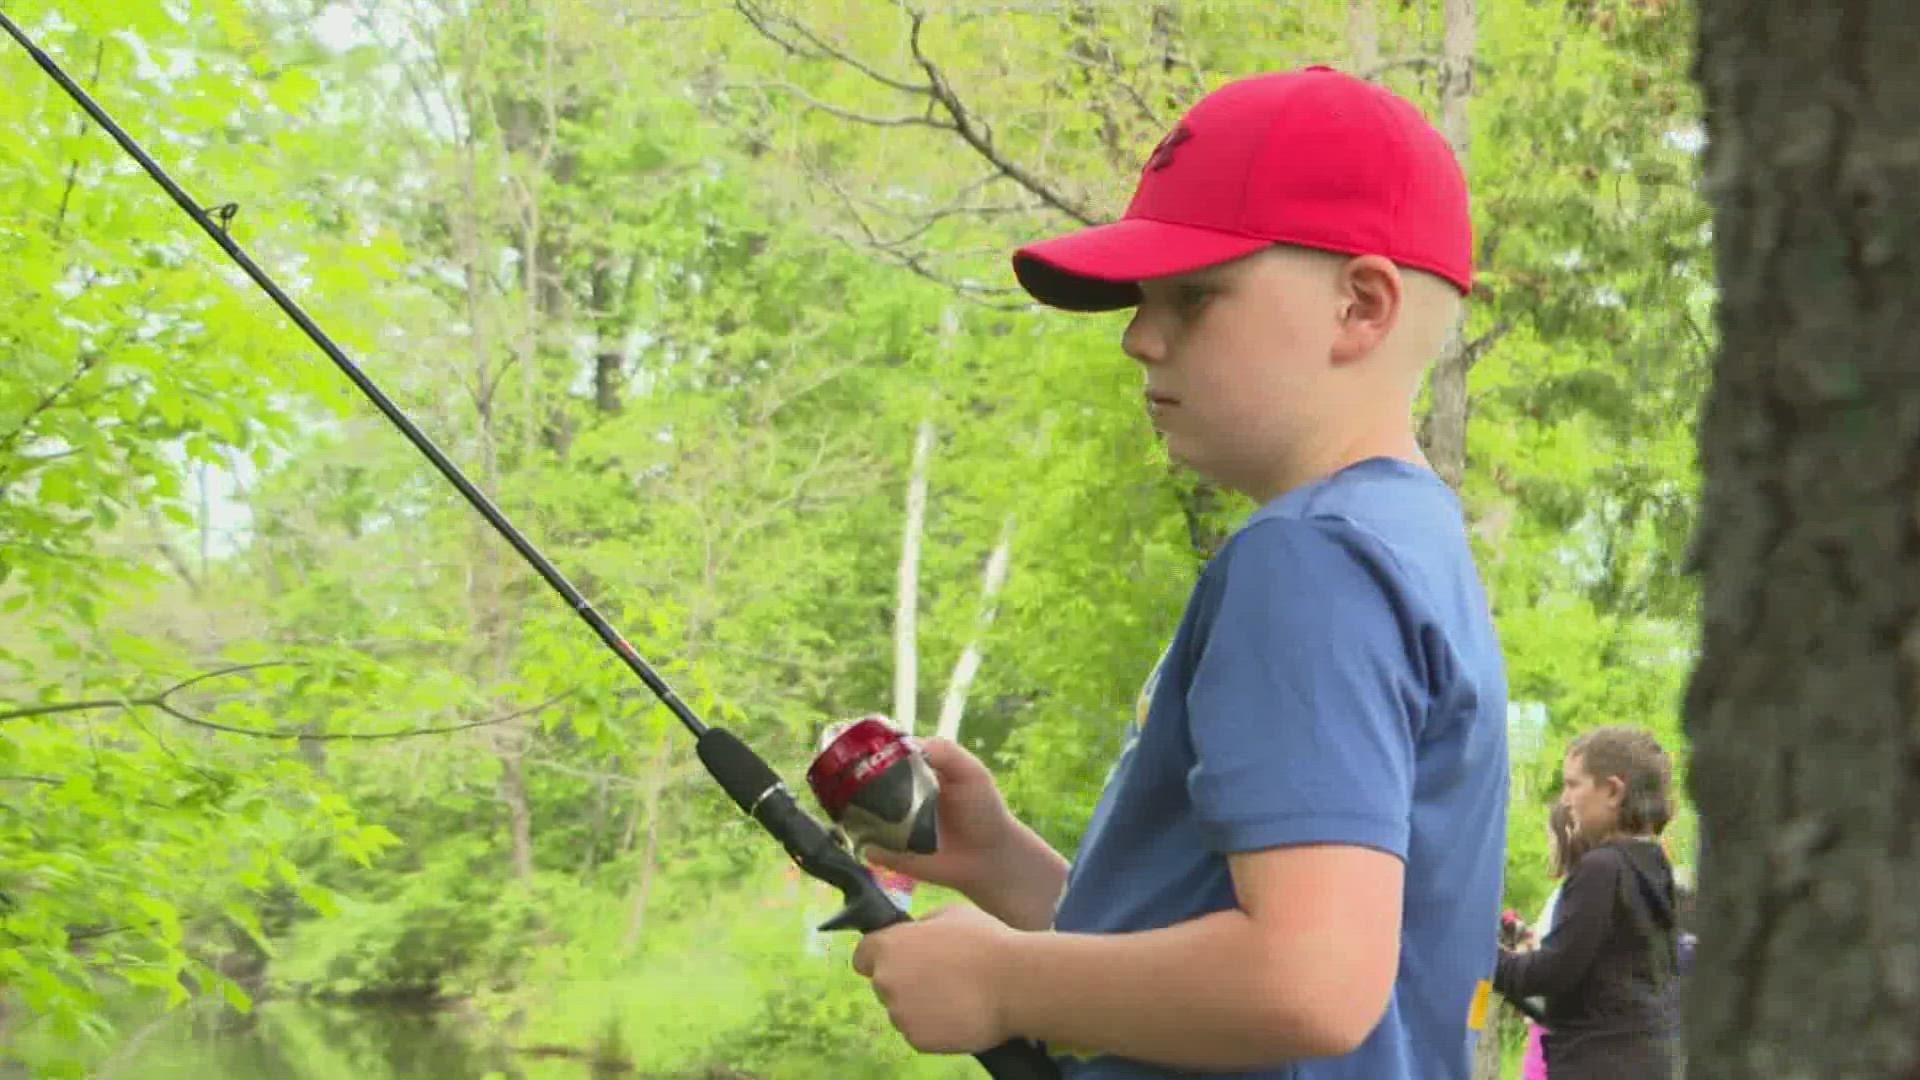 It doesn't get much more Maine than a field trip to a brook. These students learned how to catch a fish, and even got a free fishing pole.